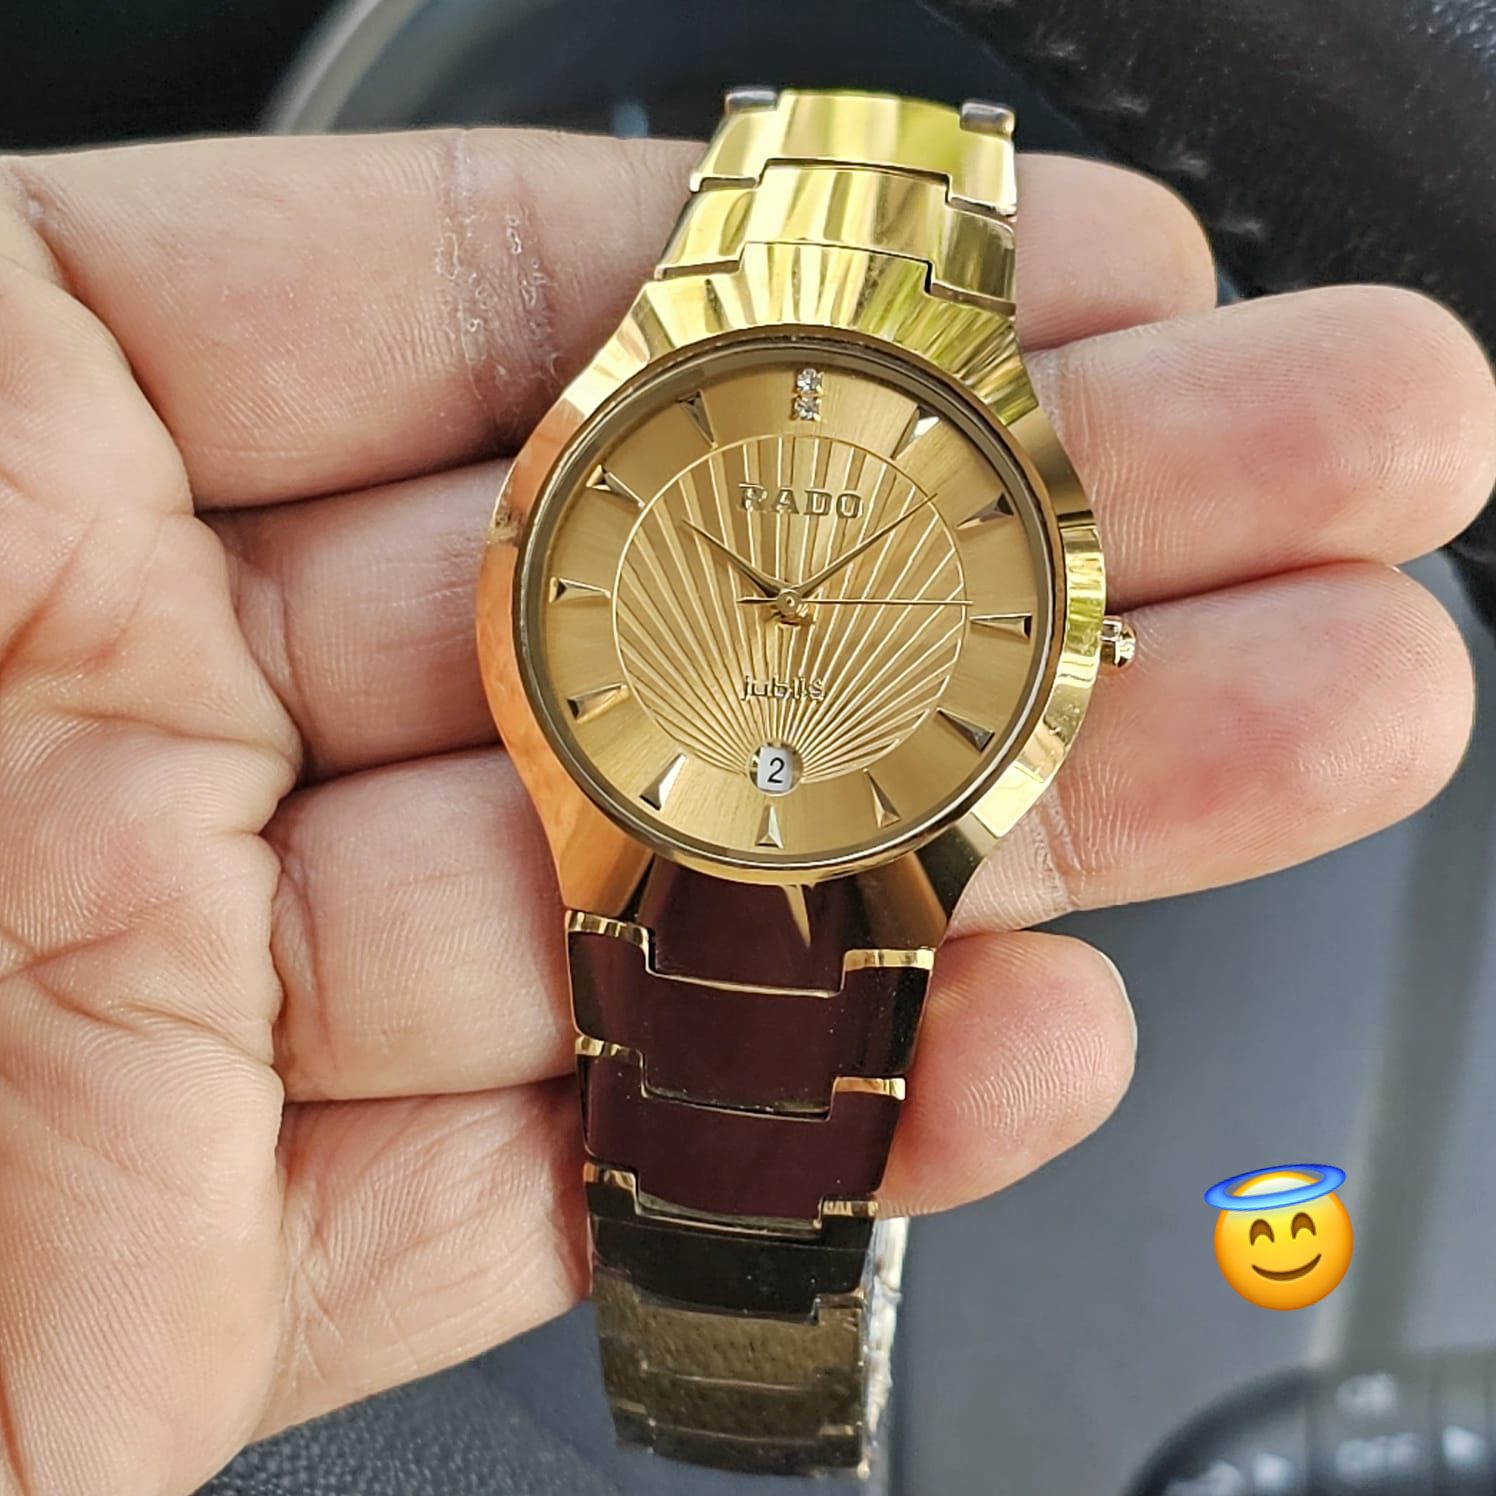 Rado Old Is Gold Watch